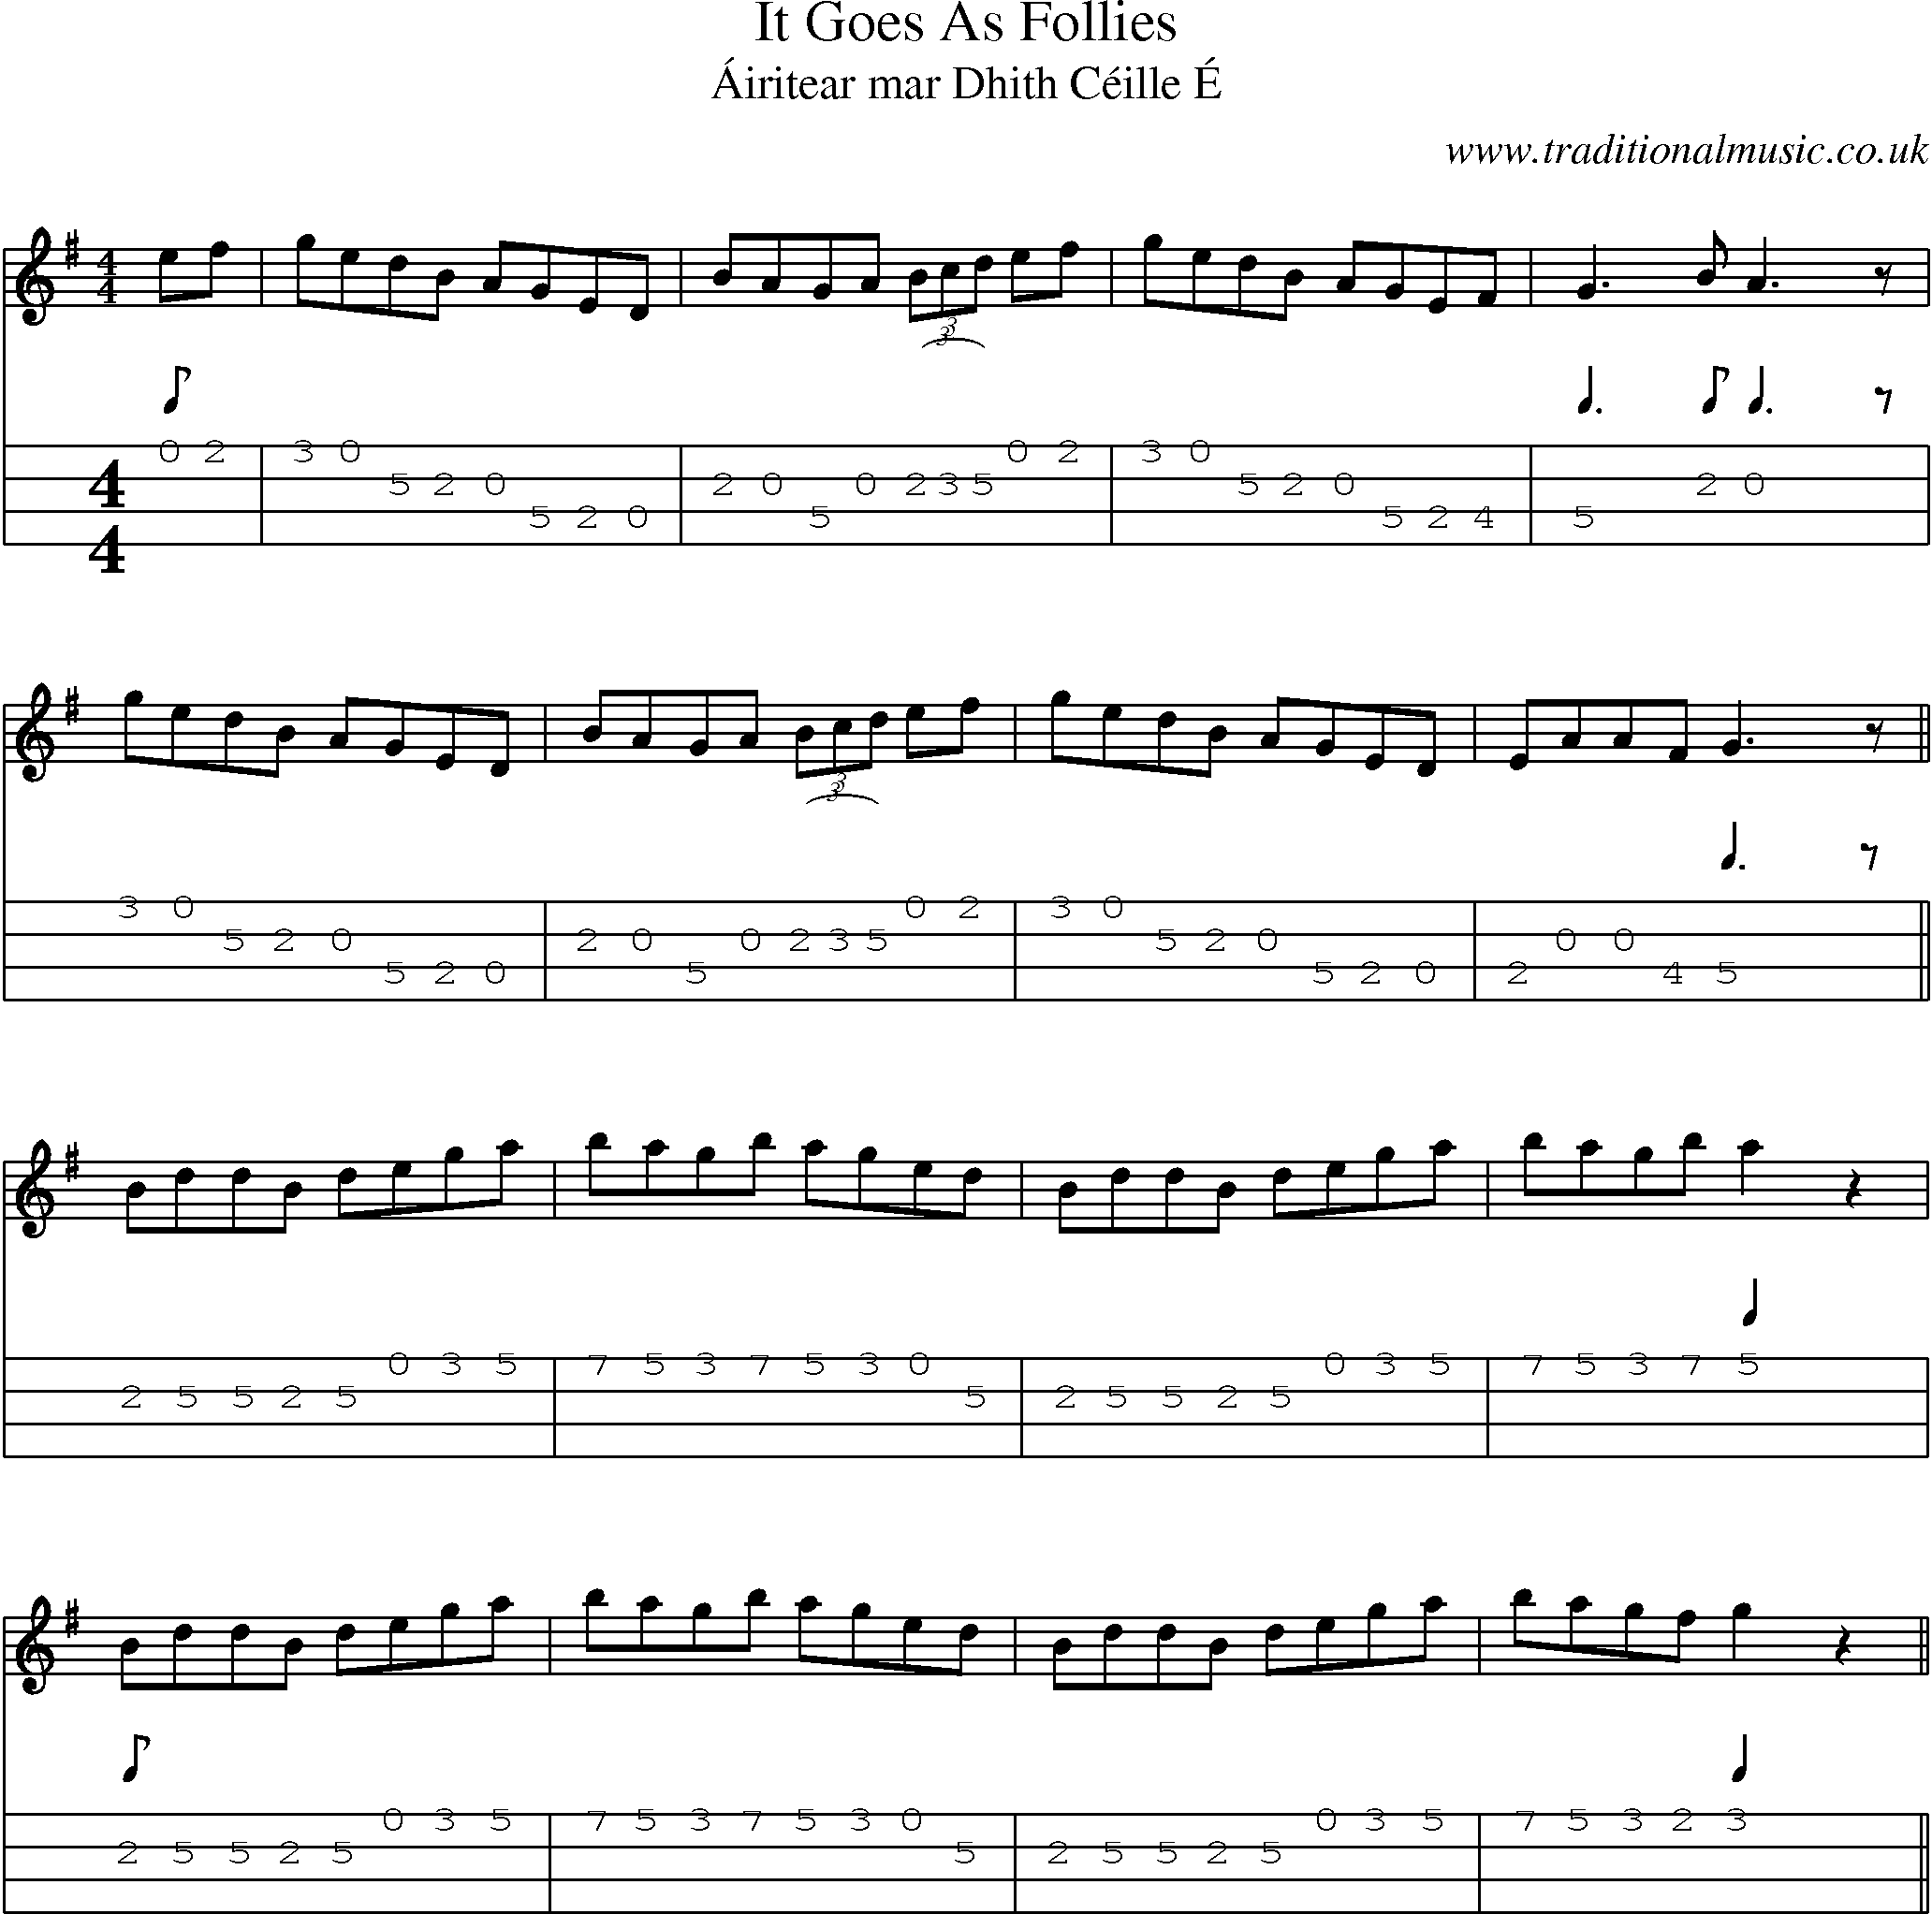 Music Score and Mandolin Tabs for It Goes As Follies